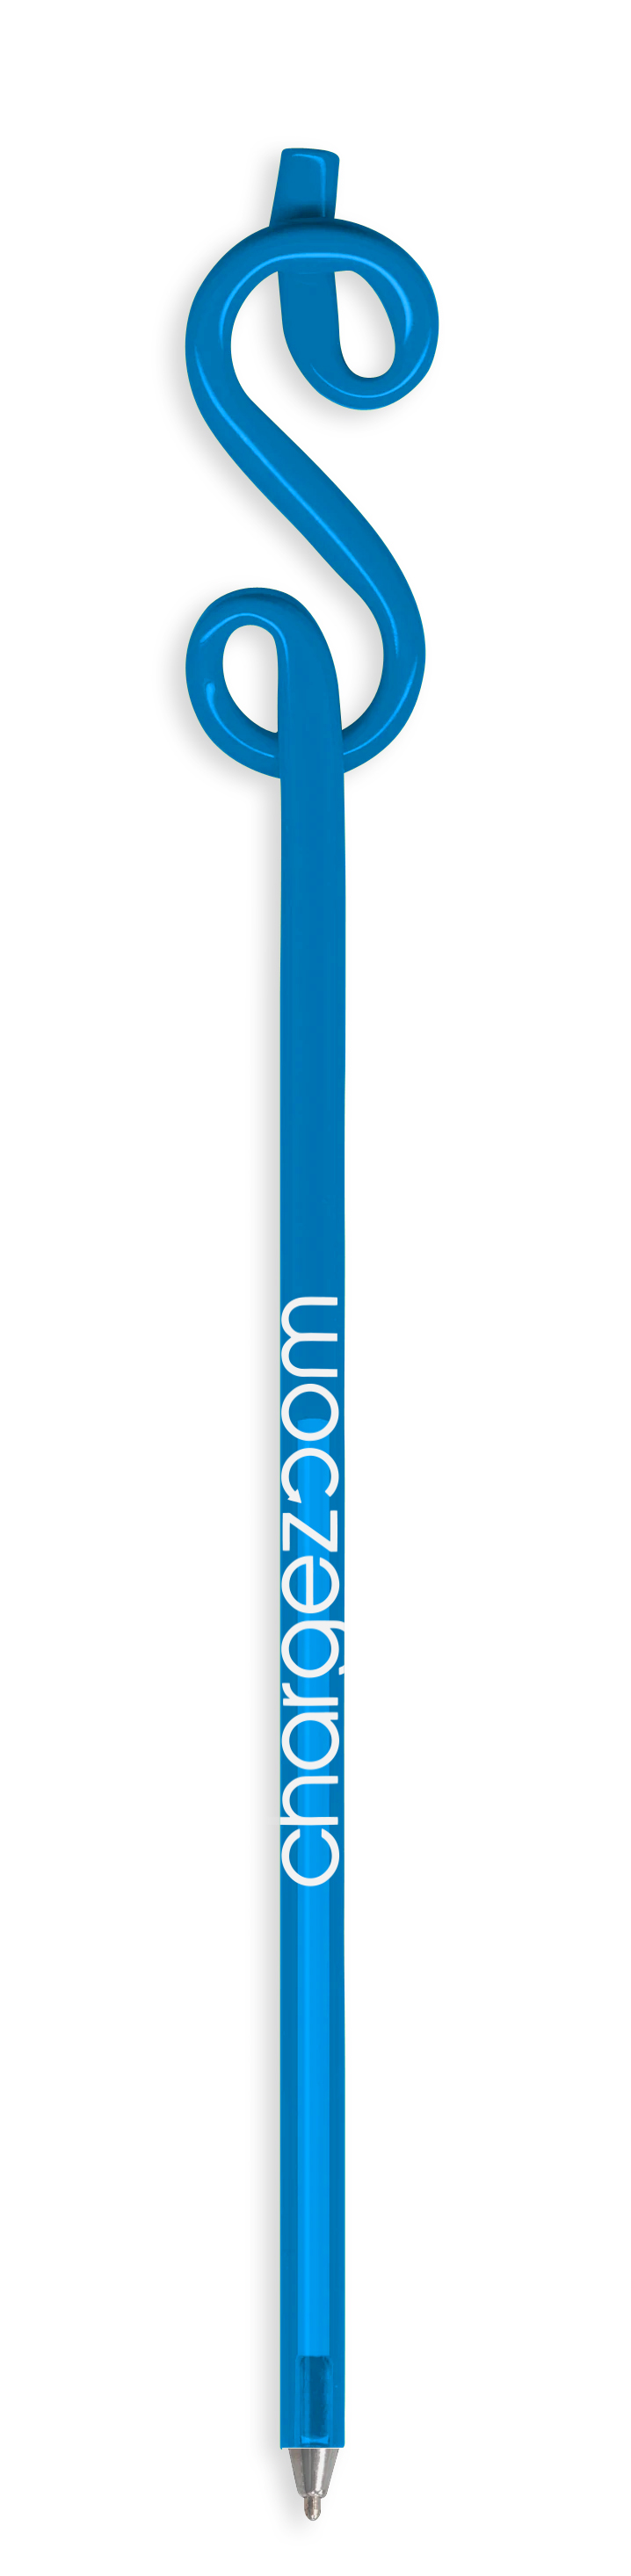 Blue branded pen with dollar sign at top